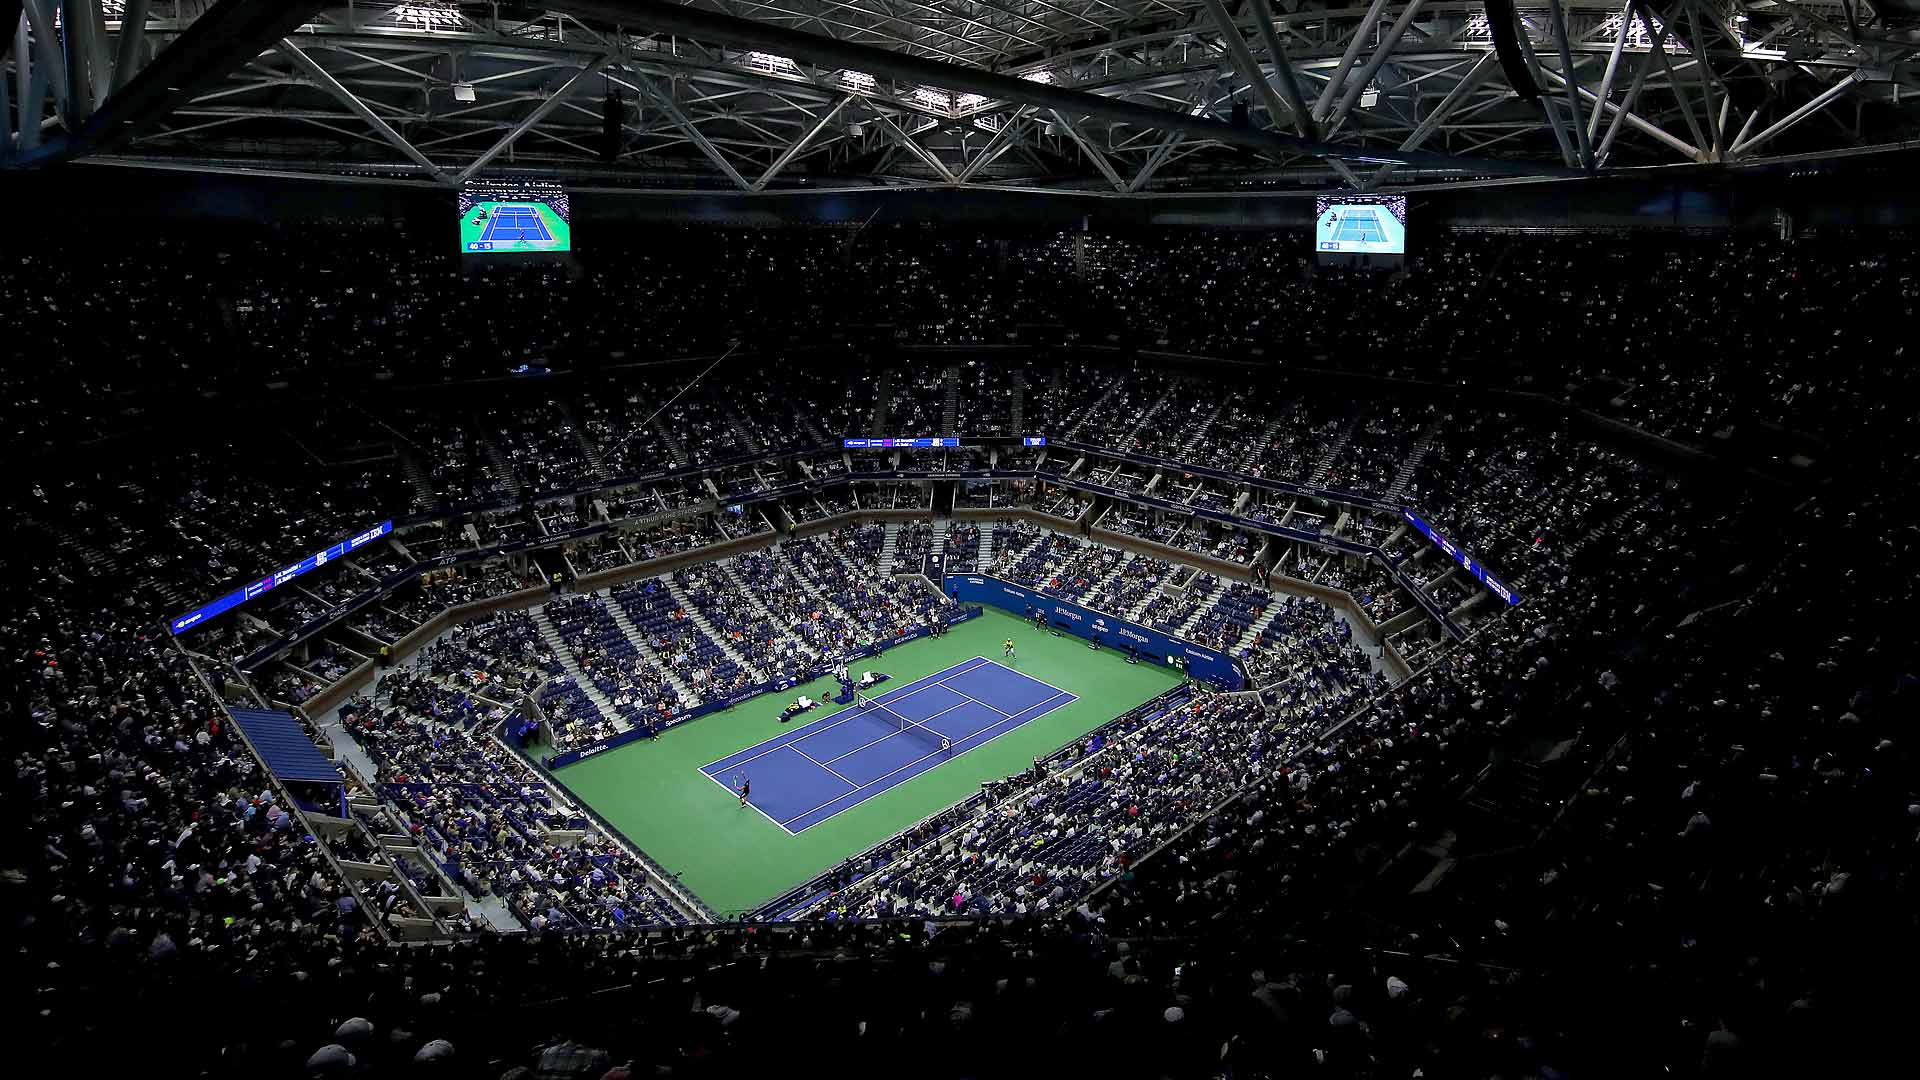 The US Open will be held from 28 August  - 10 September at the USTA Billie Jean King National Tennis Center in New York.